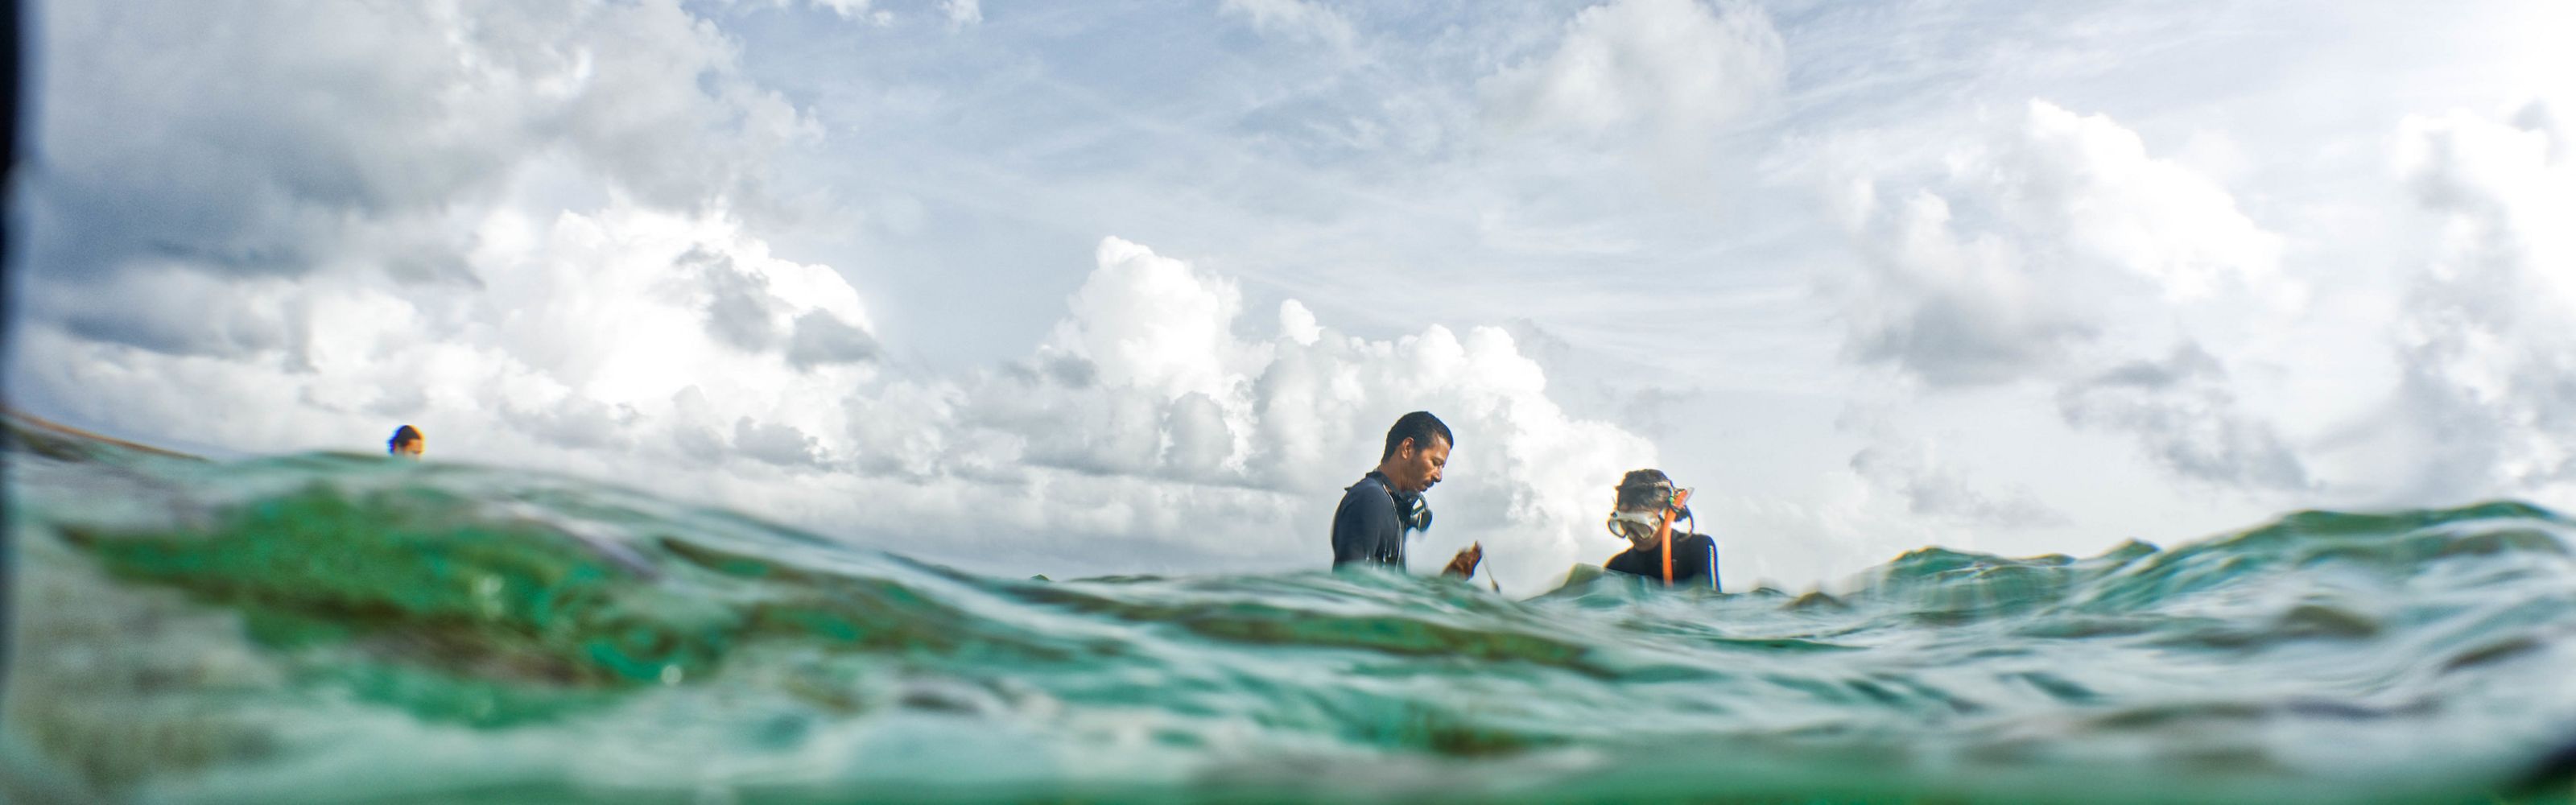 In this view from under and above water, two people in wet suits harvest seaweed from the waters of Belize.